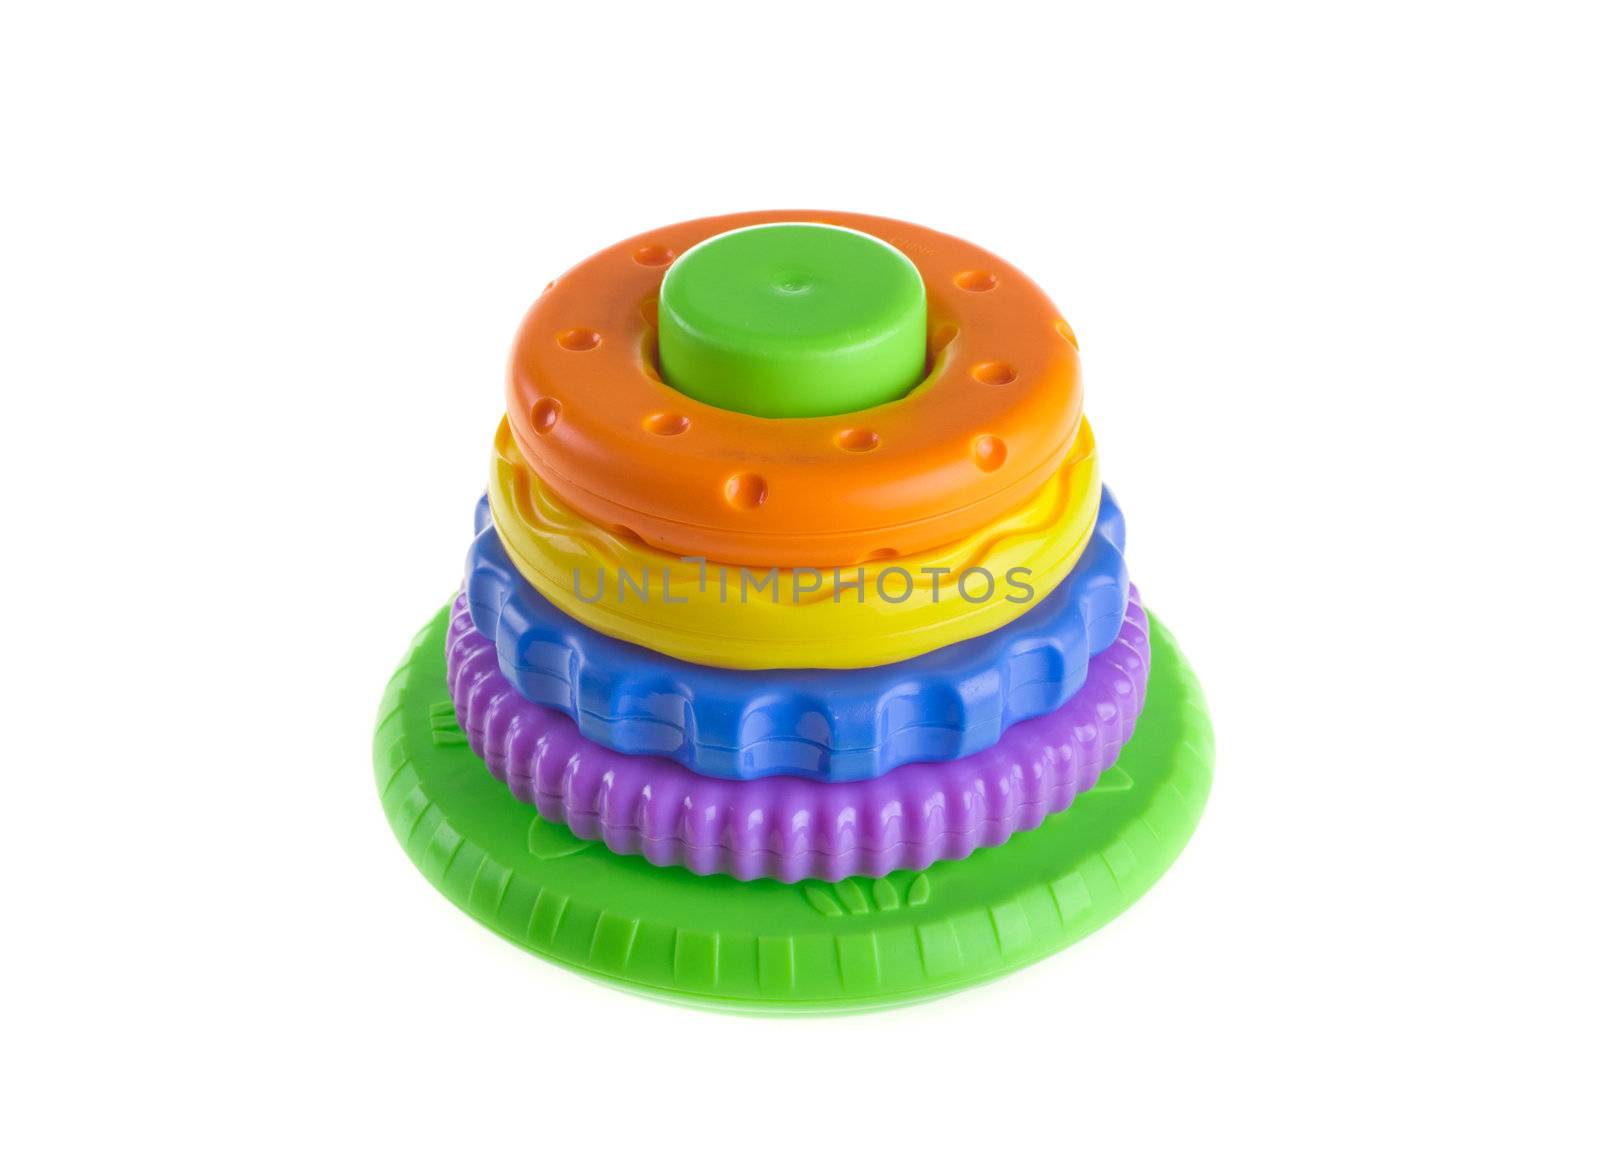 Children's toy isolated on the white background